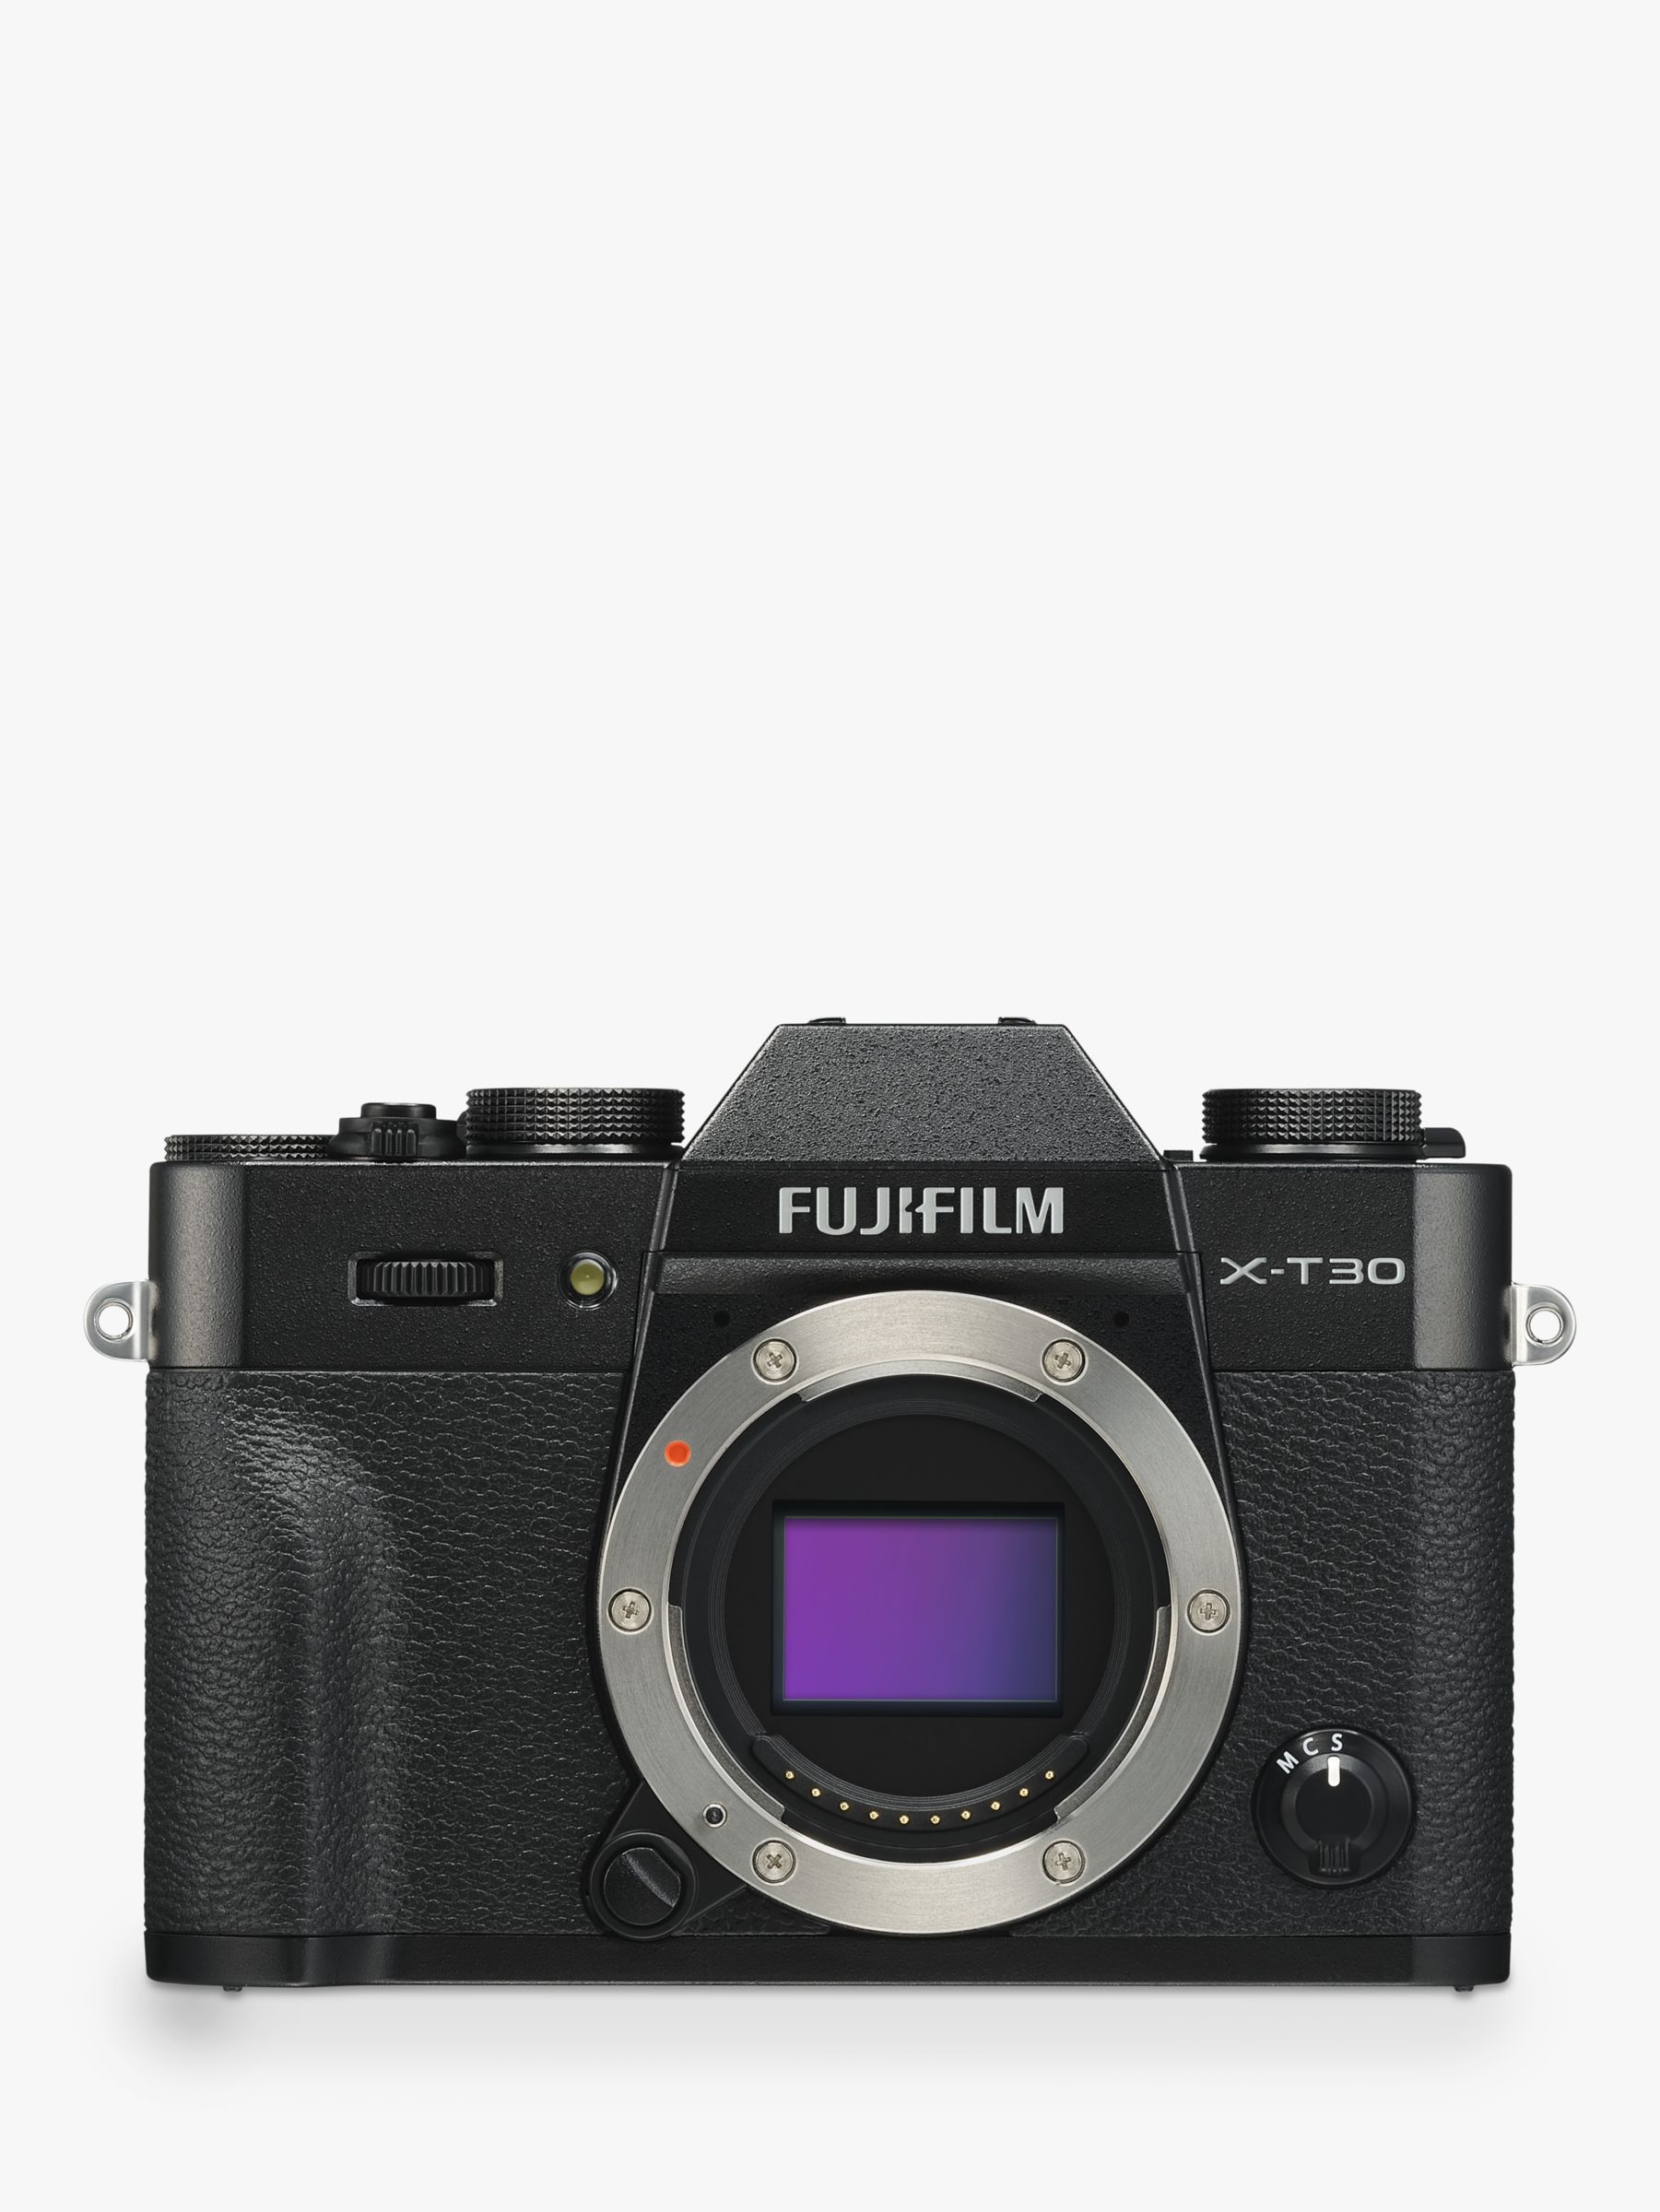 Image of Fujifilm XT30 Compact System Camera 4K Ultra HD 261MP WiFi OLED EVF 3 LCD Touch Screen Body Only